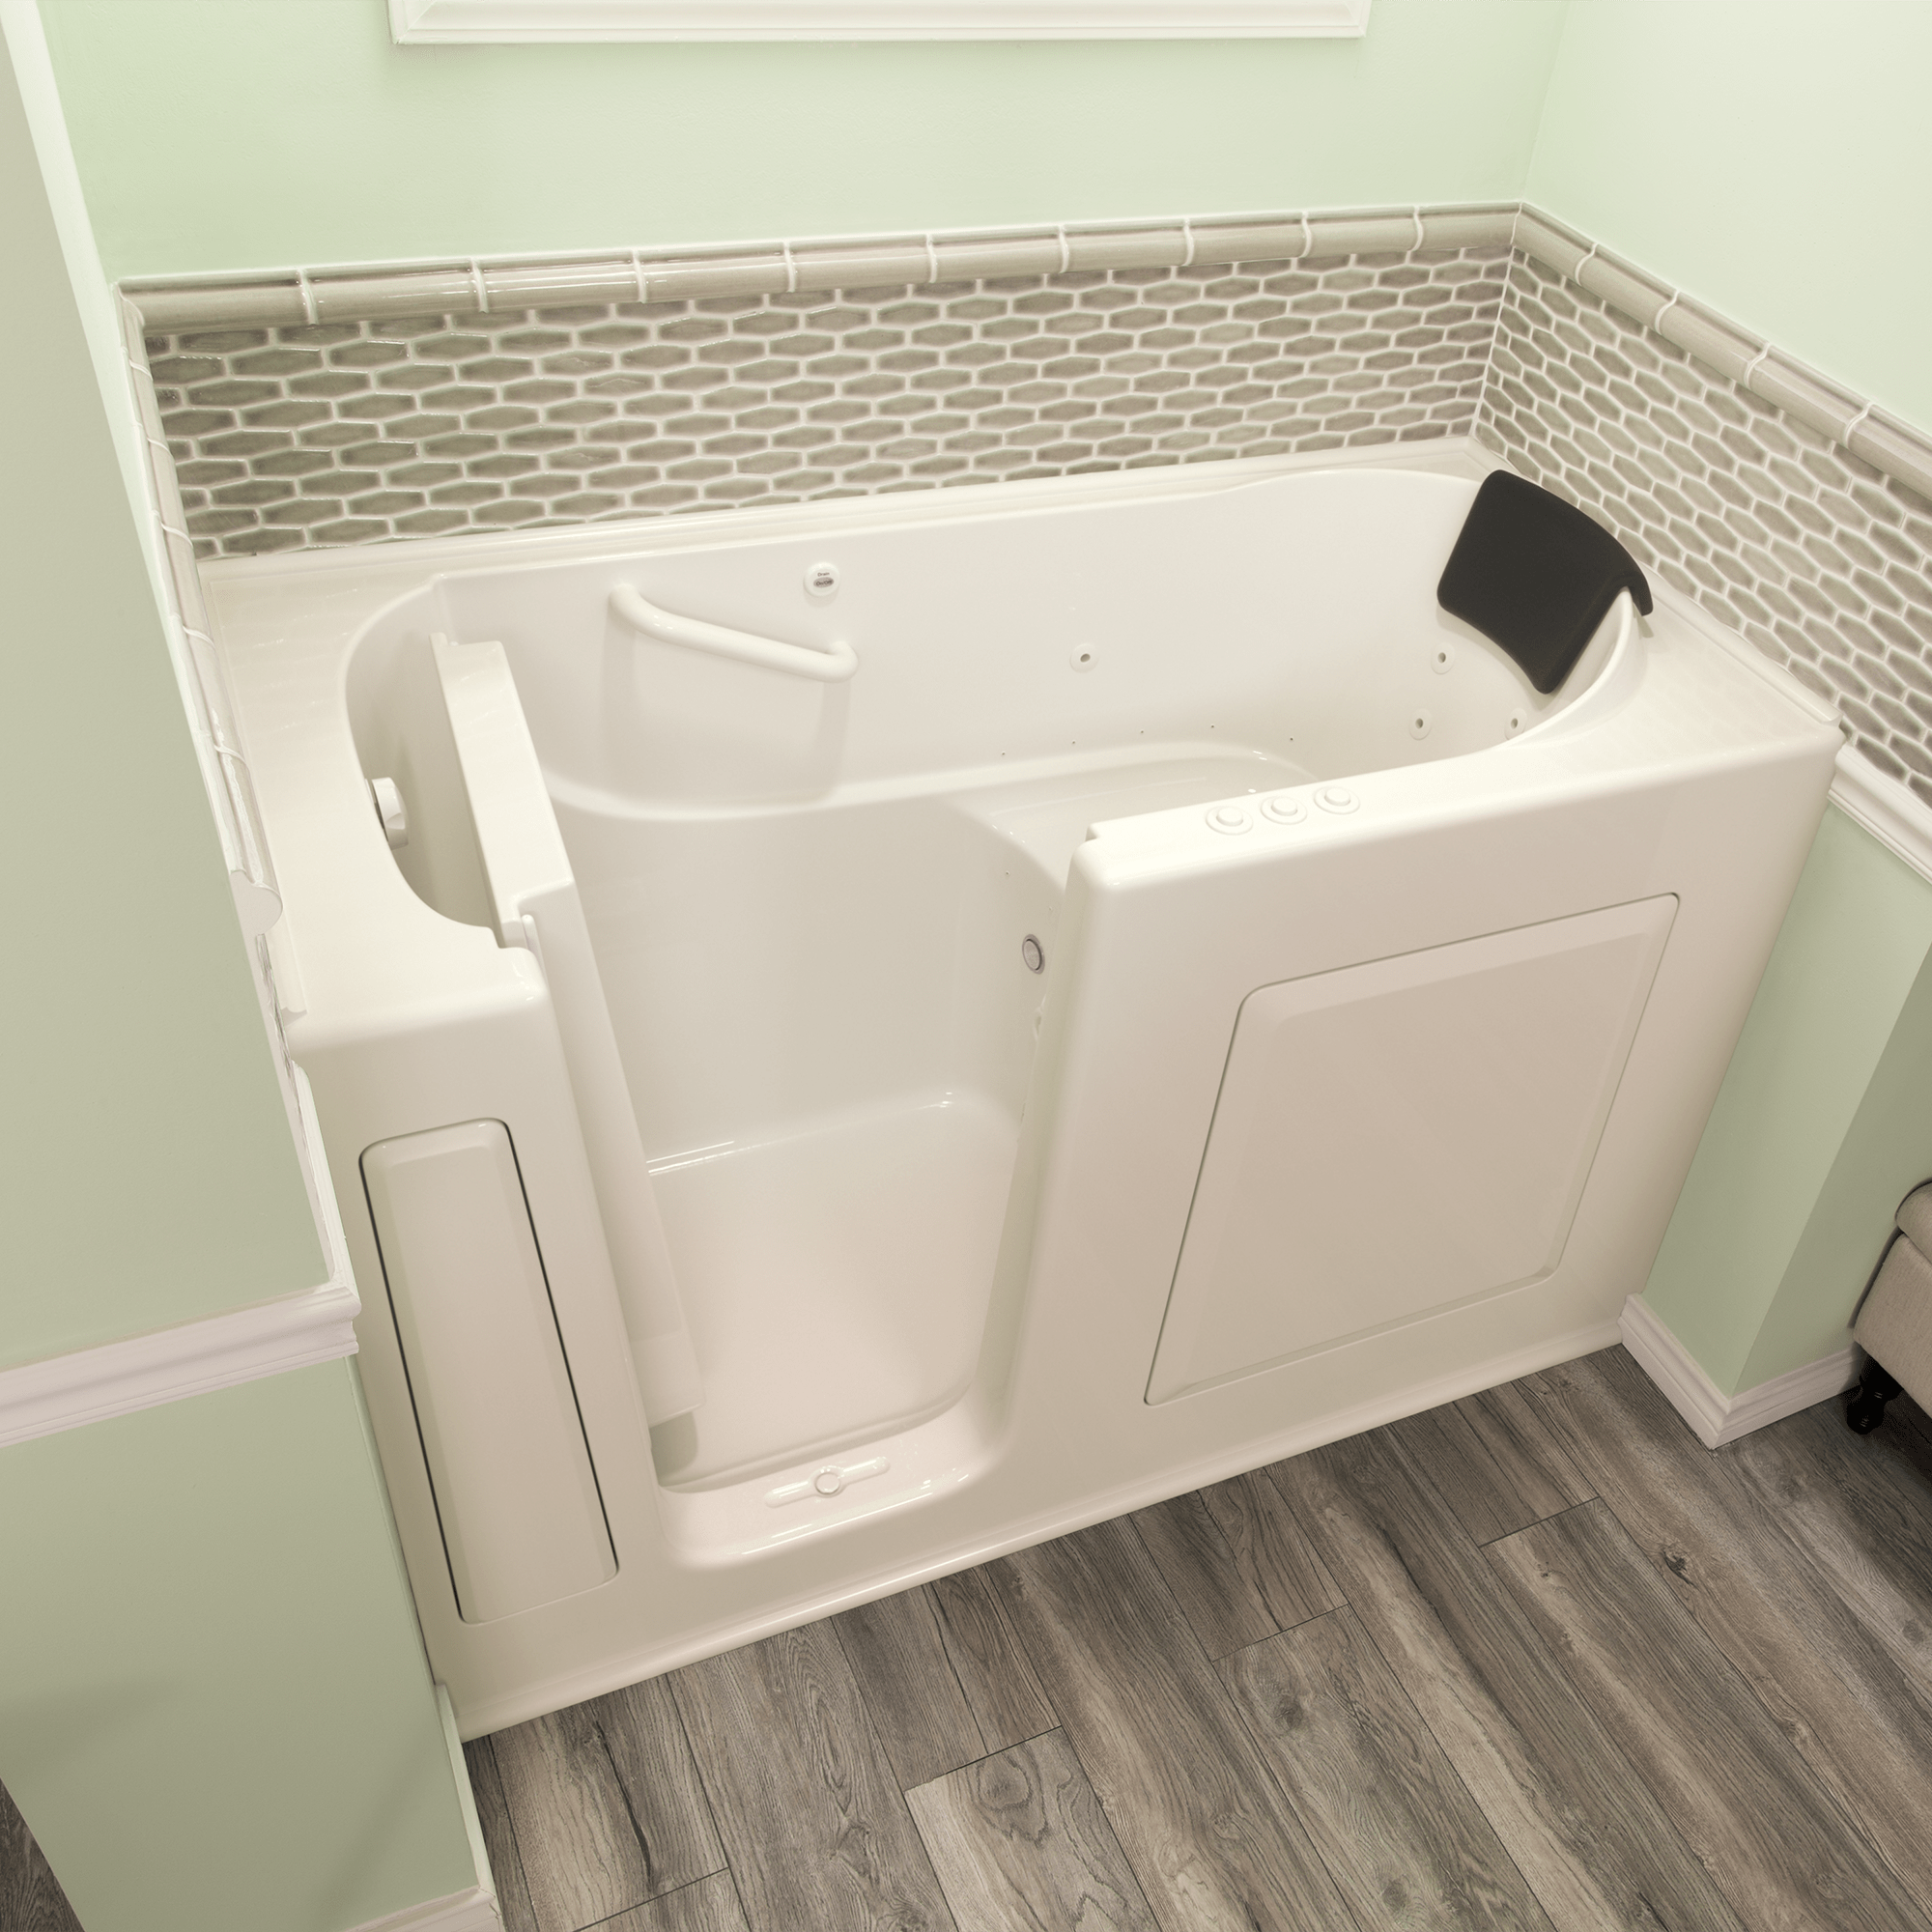 Gelcoat Premium Series 30 x 60 -Inch Walk-in Tub With Combination Air Spa and Whirlpool Systems - Left-Hand Drain